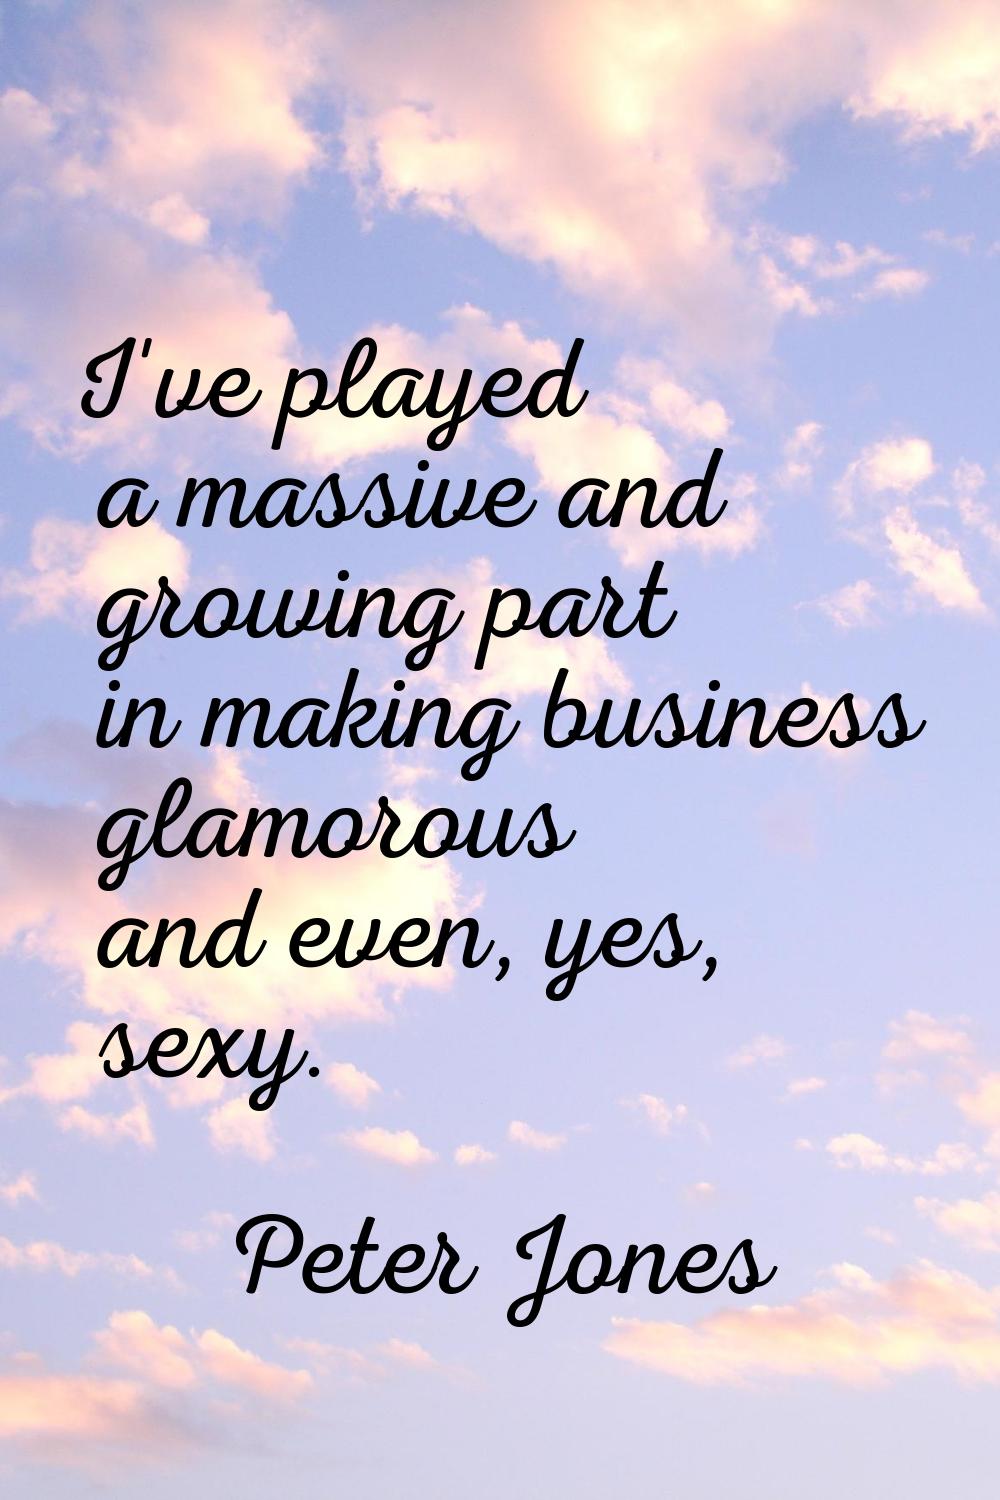 I've played a massive and growing part in making business glamorous and even, yes, sexy.